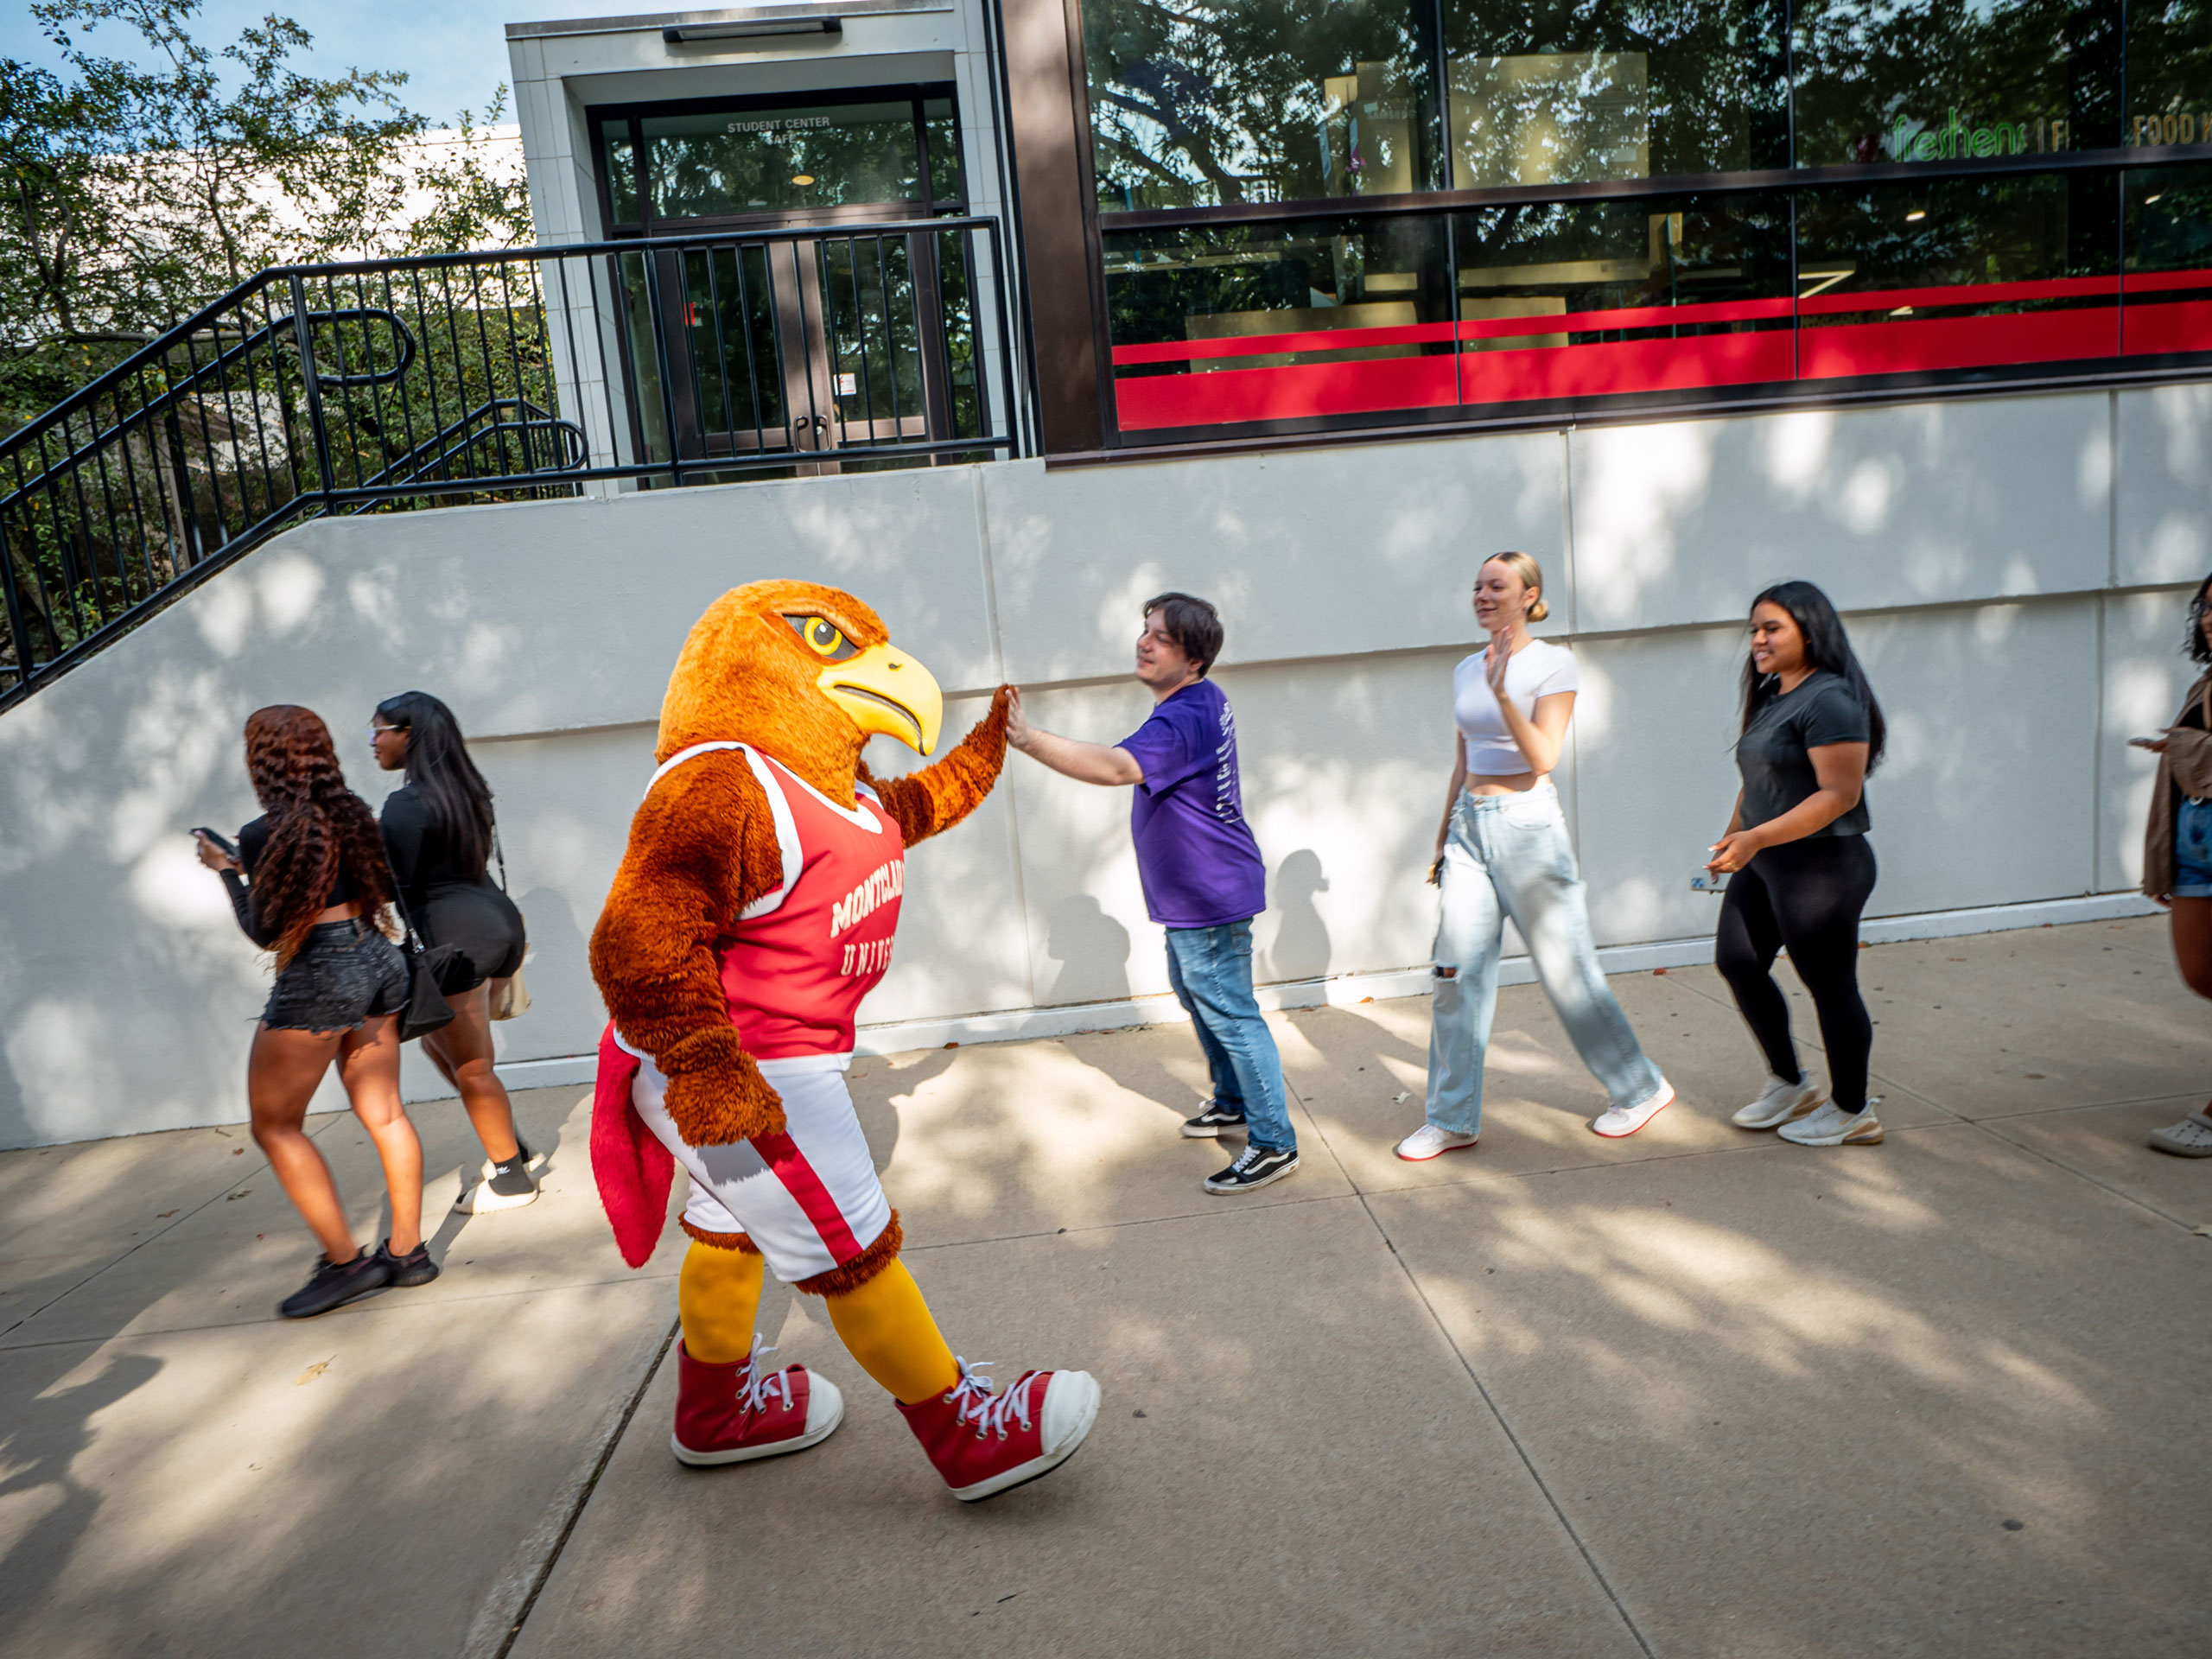 The mascot Rocky high-fives students as they walk past him.